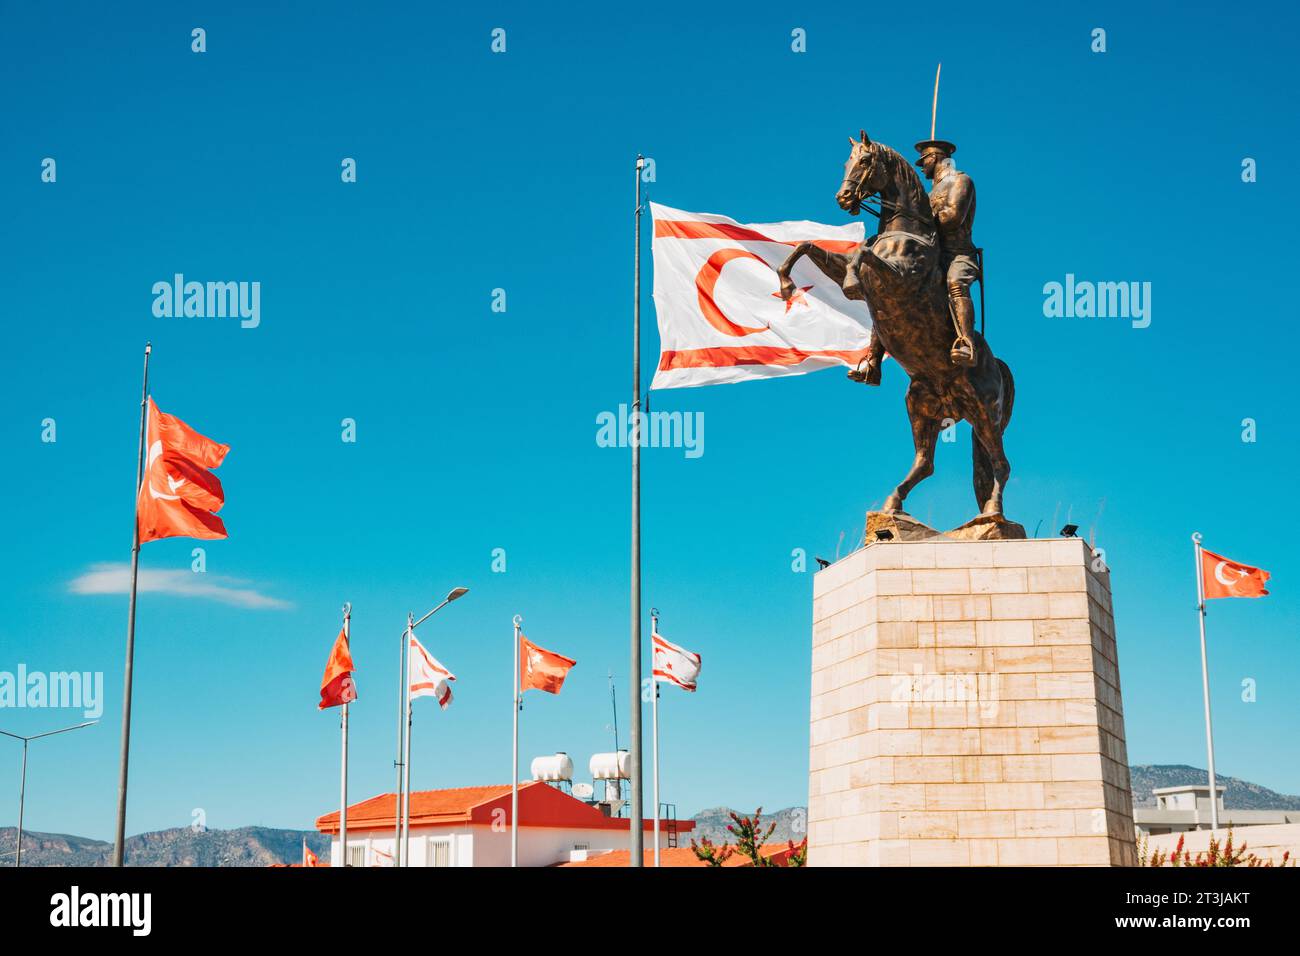 the Türkiye and Northern Cyprus flags fly next to a statue of Atatürk on horseback at a traffic roundabout in North Nicosia Stock Photo